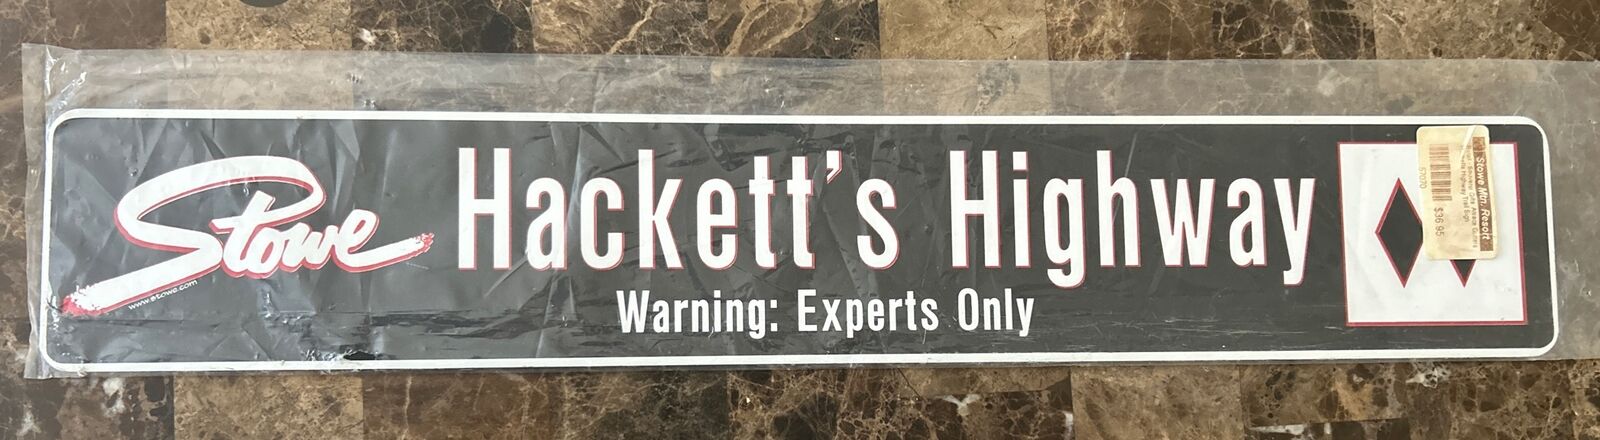 Stowe Vermont Hackett’s Highway sign.  Warning: Experts Only